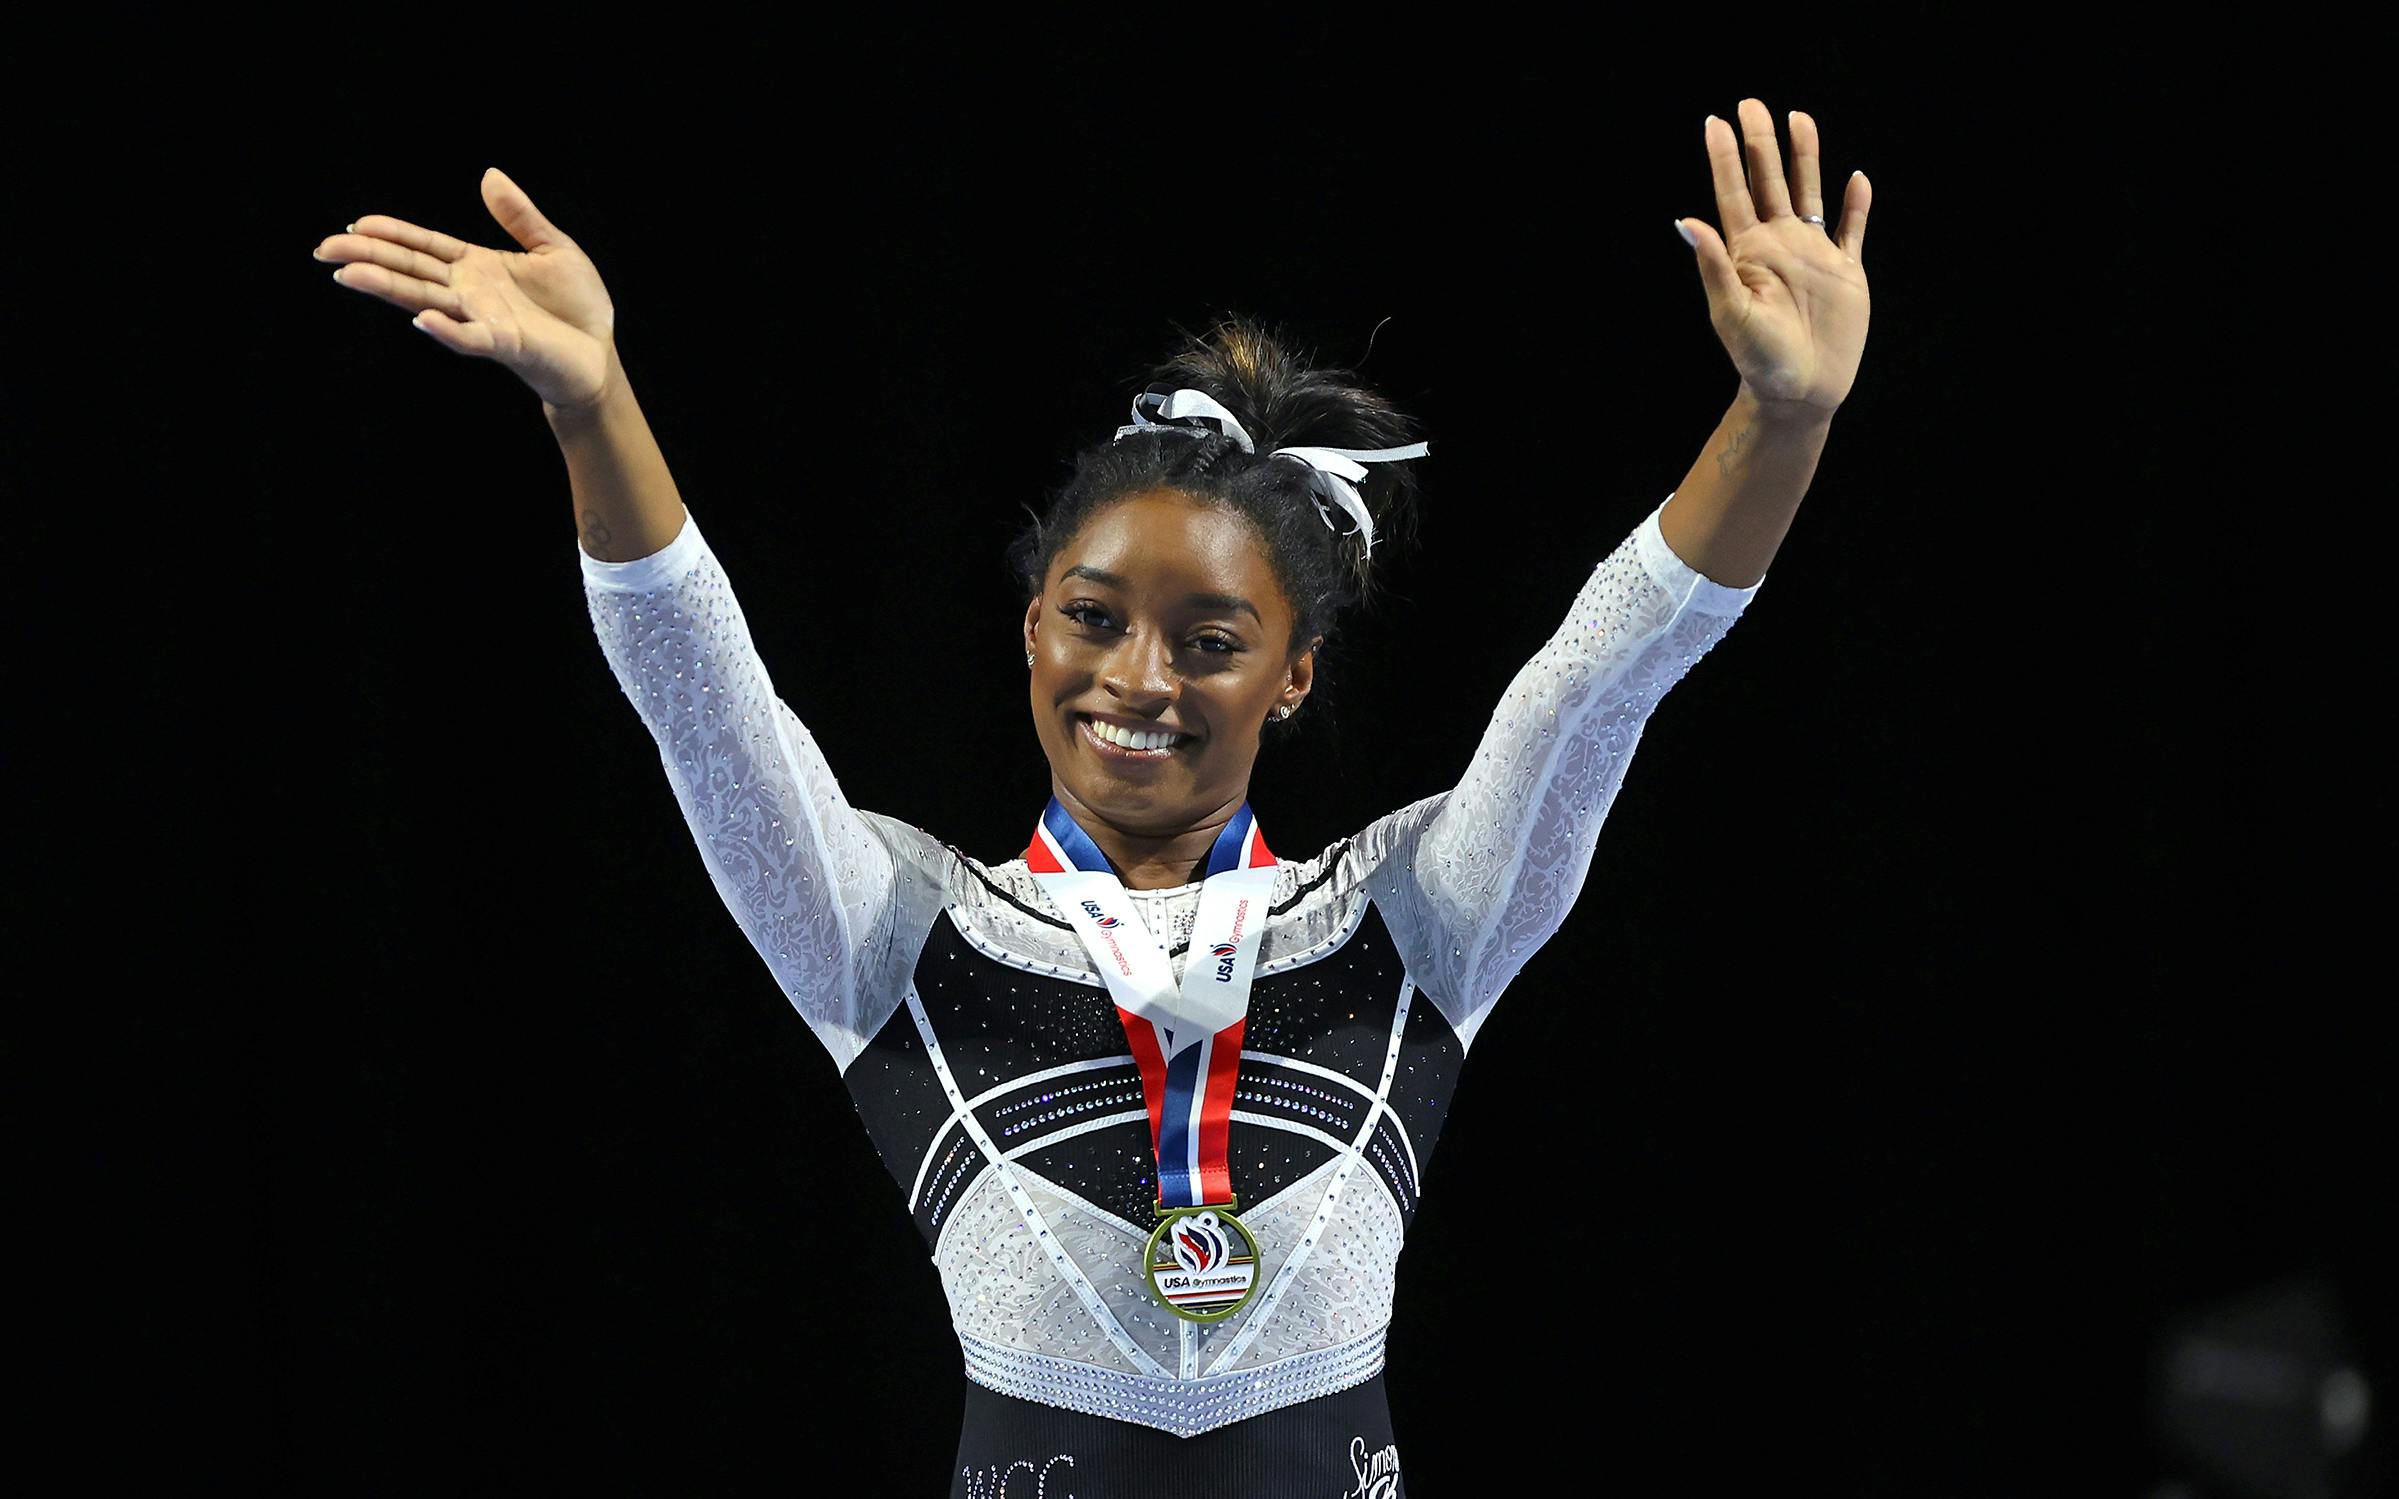 https://img.texasmonthly.com/2023/08/simone-biles-core-classic.jpg?auto=compress&crop=faces&fit=fit&fm=pjpg&ixlib=php-3.3.1&q=45